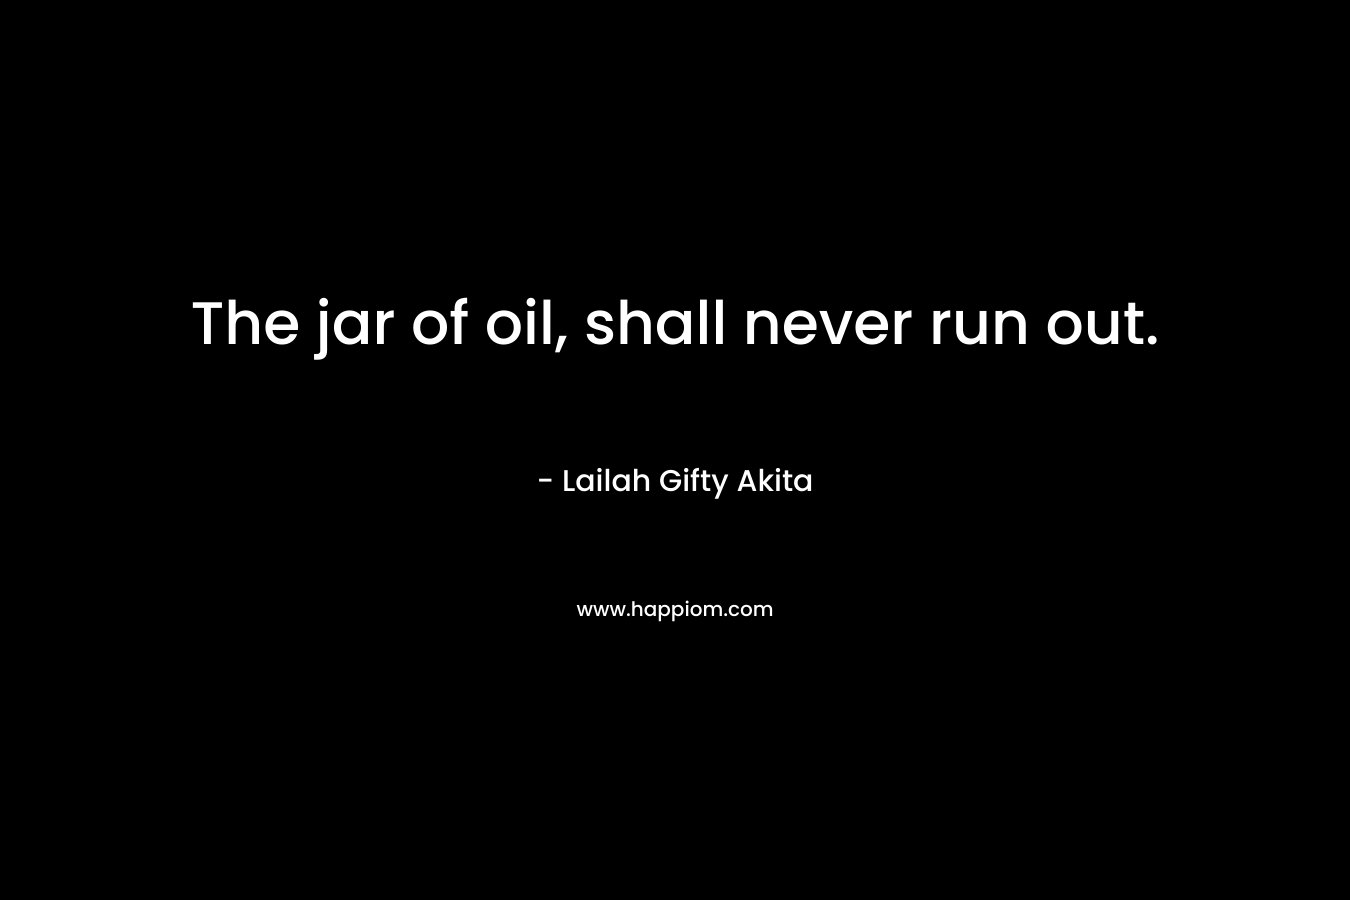 The jar of oil, shall never run out.